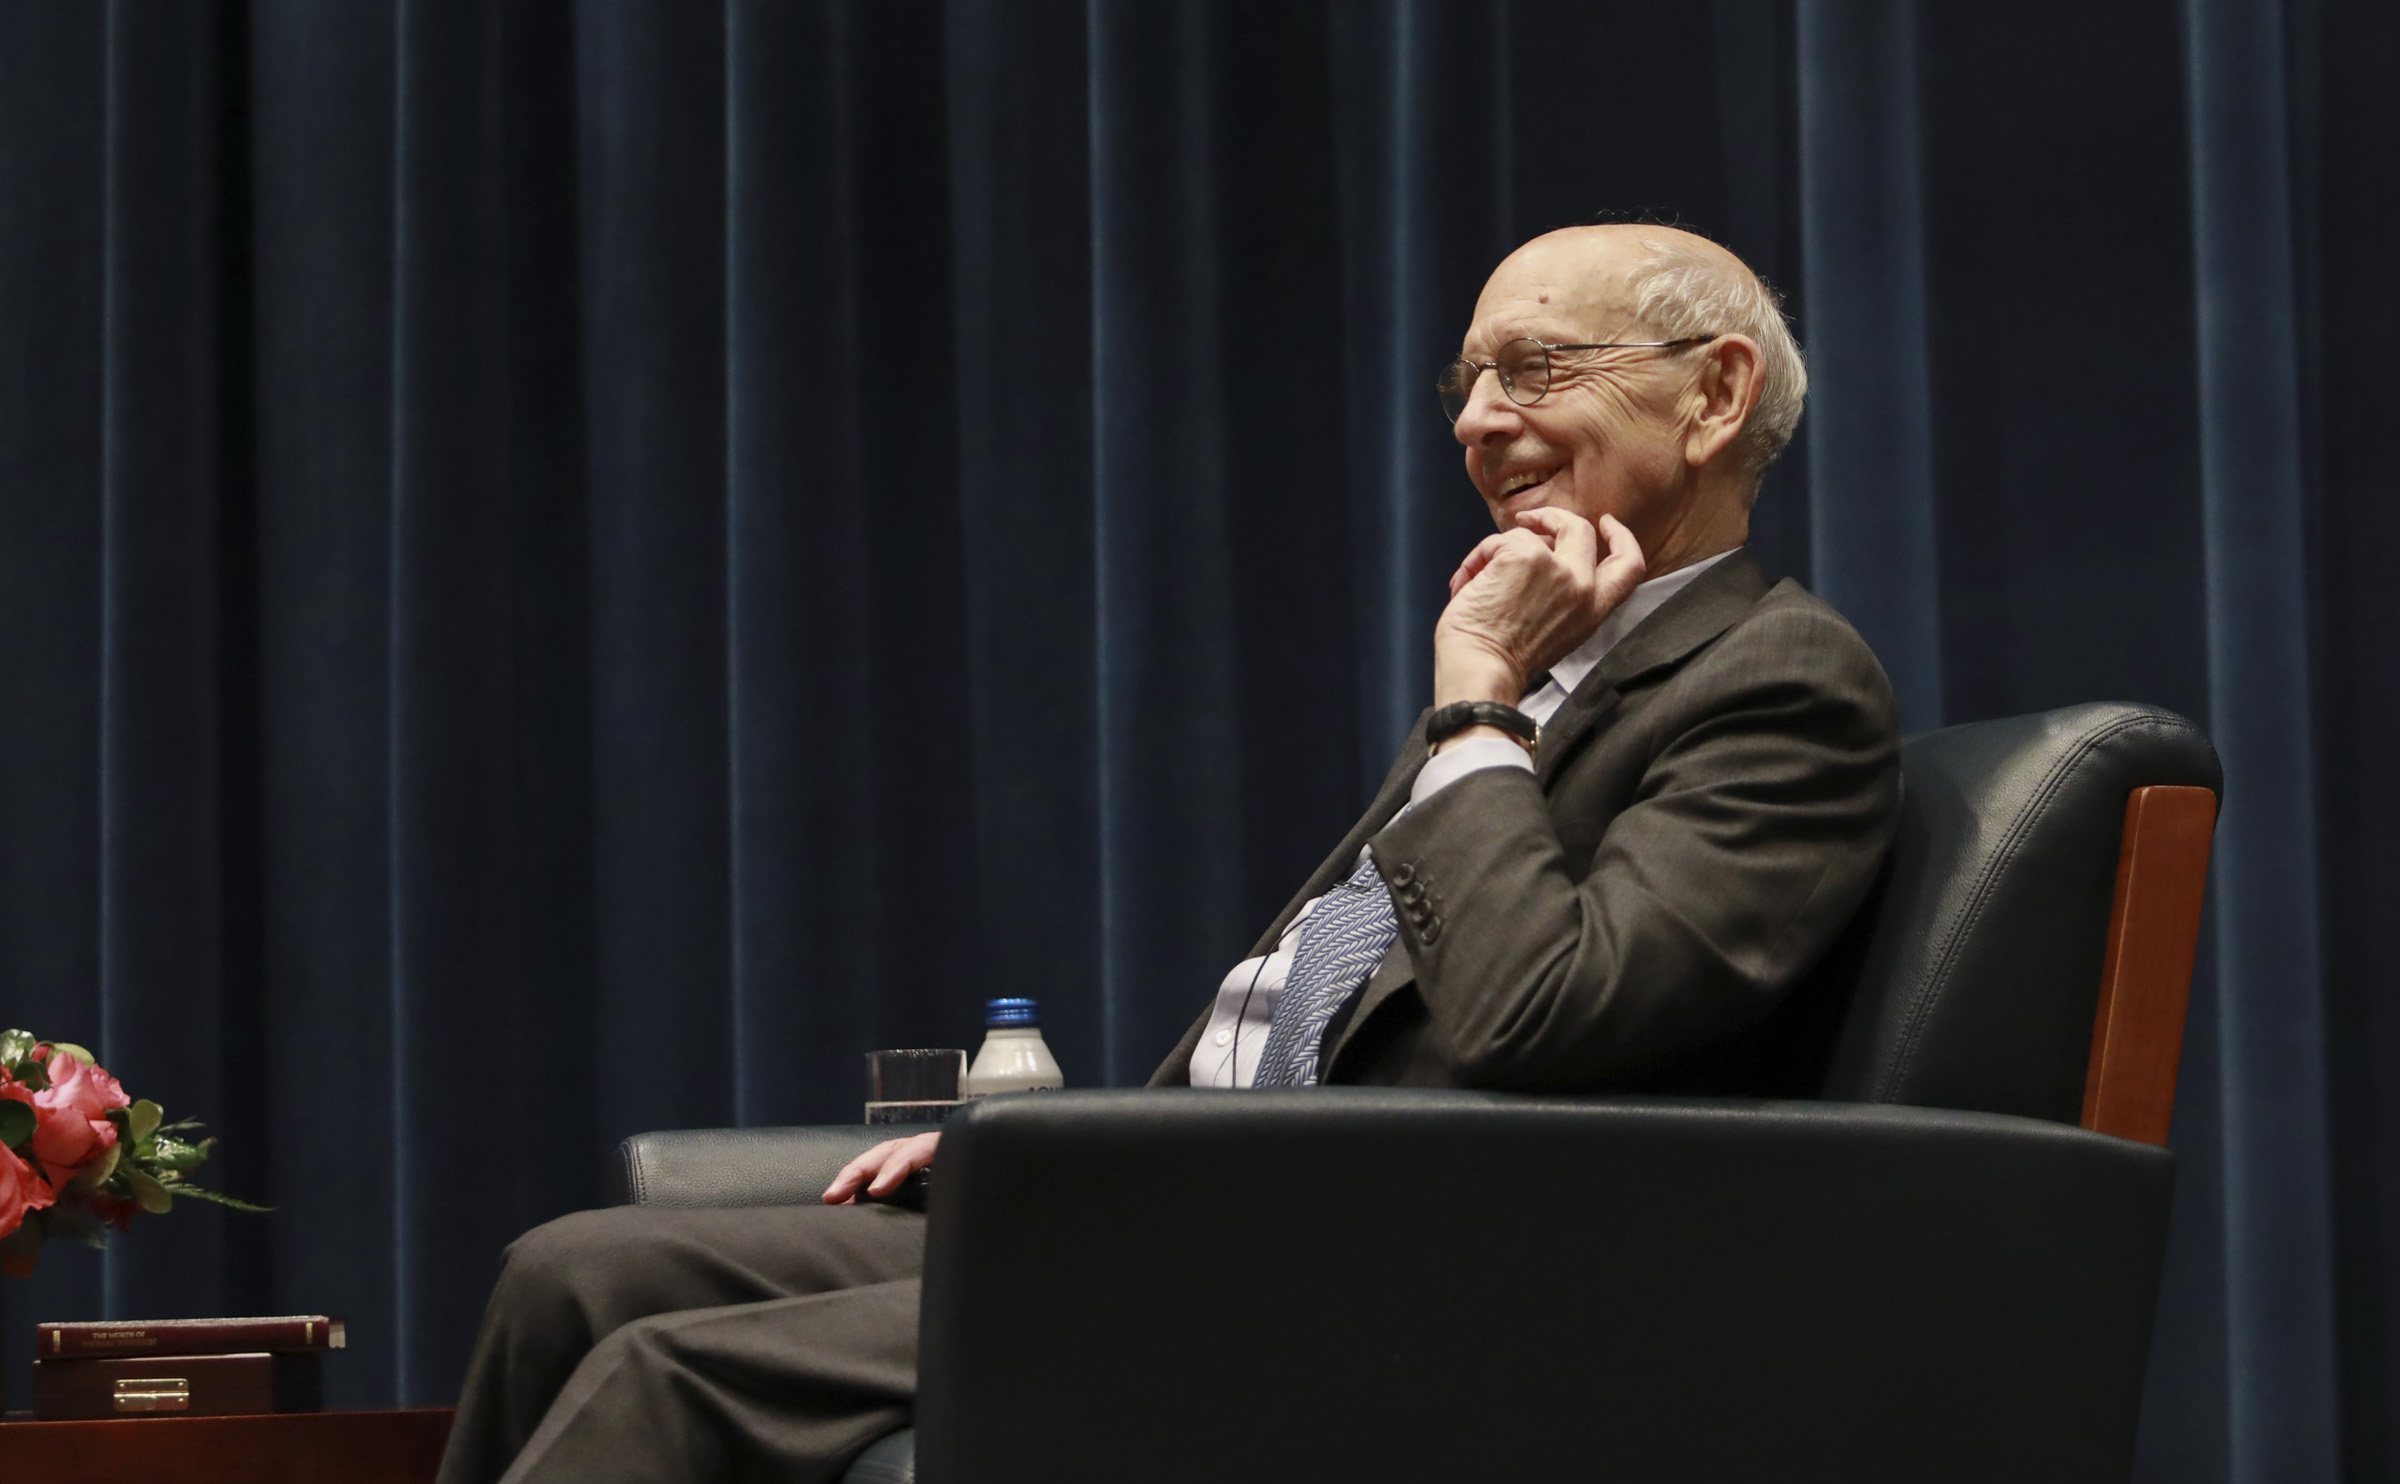 Breyer, seated in a leather chair, smiles and scratches his chin.